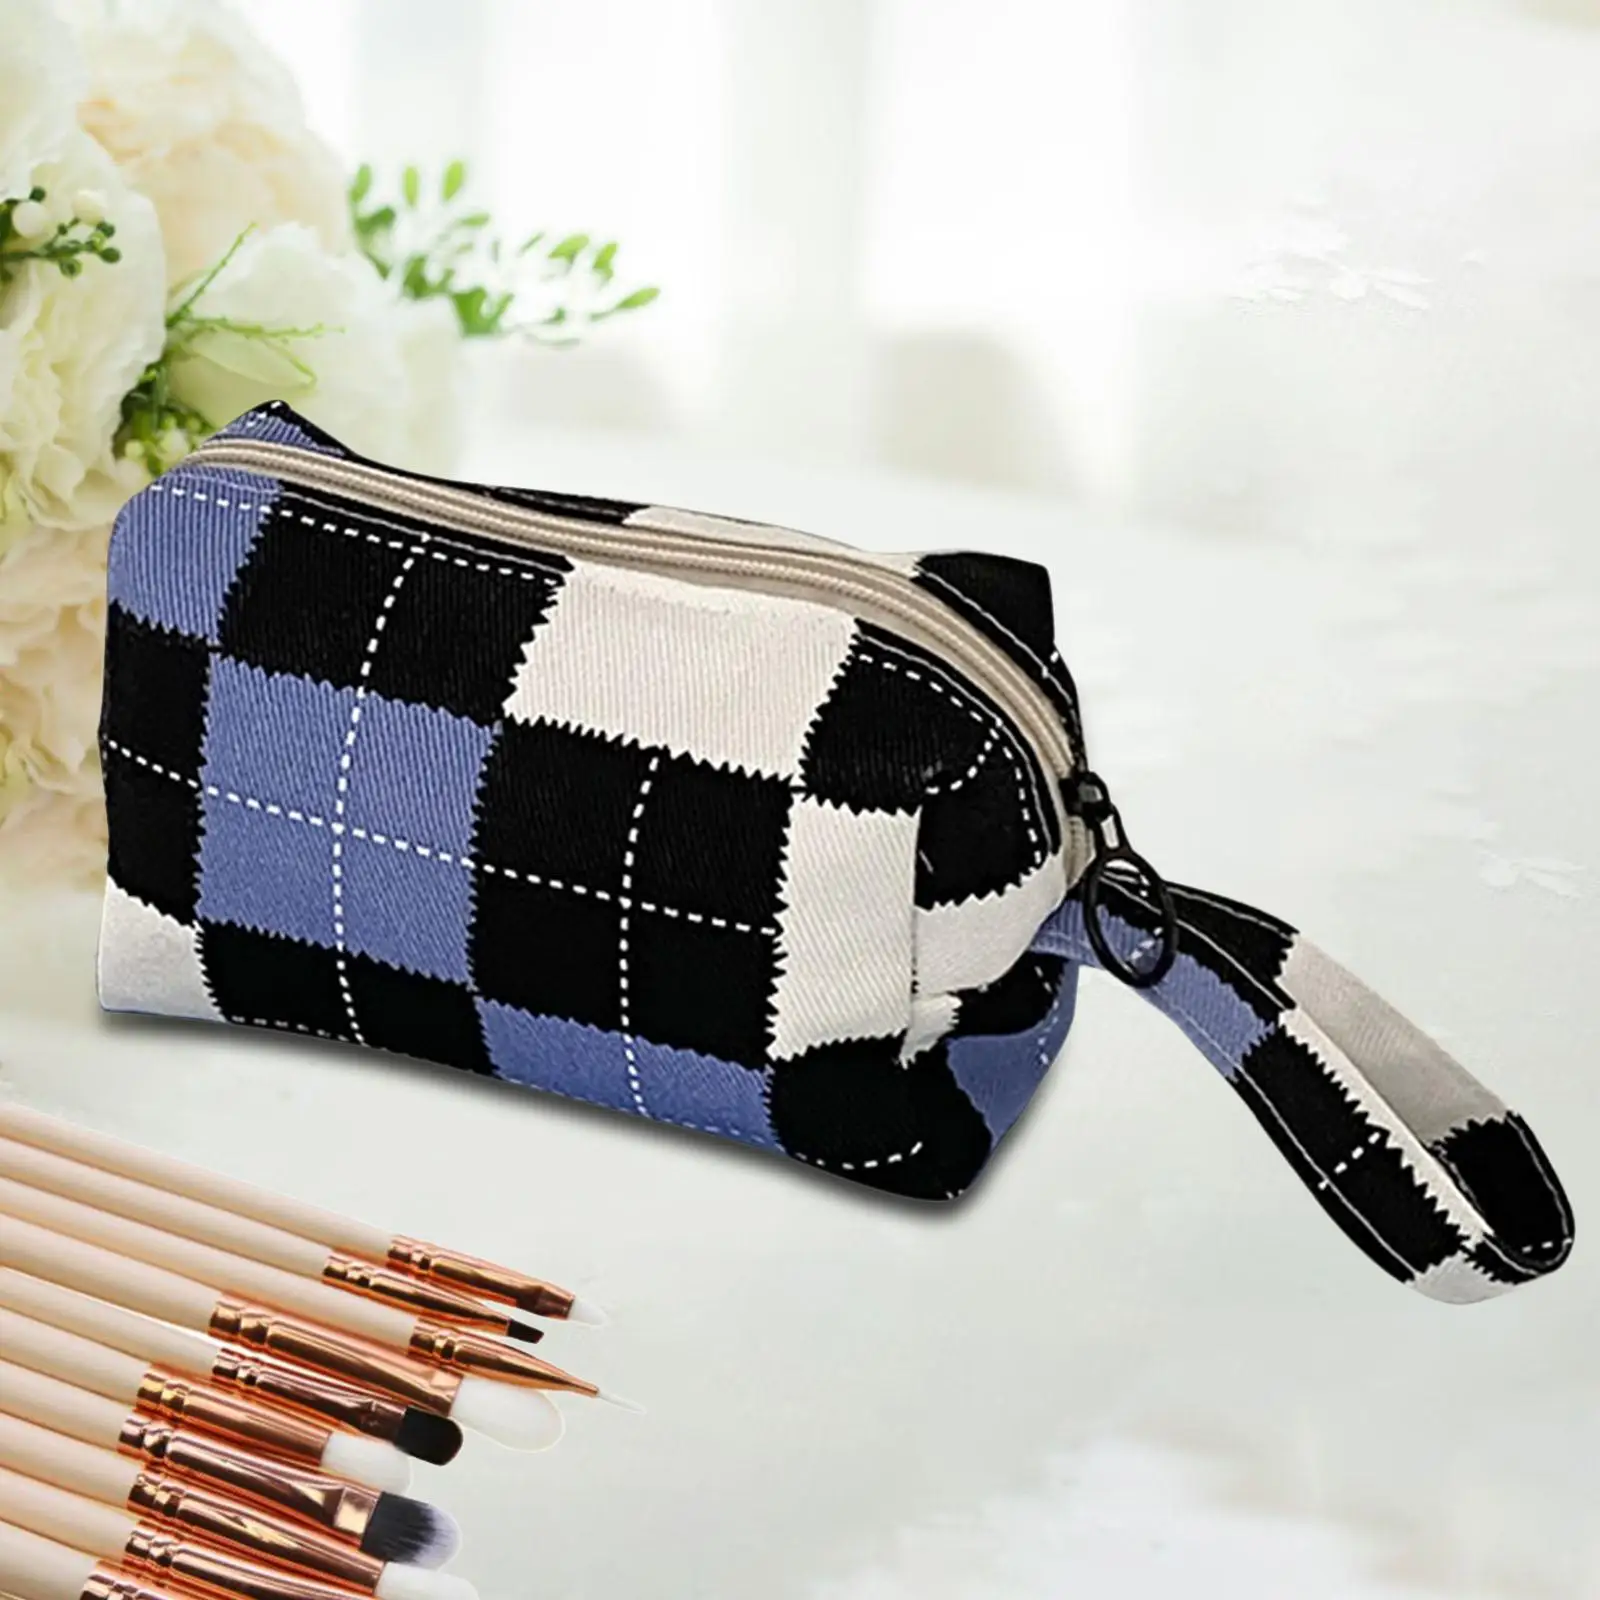 Makeup Bag Zipper Design Roomy Cosmetic Pouch for Women and Girls Storage